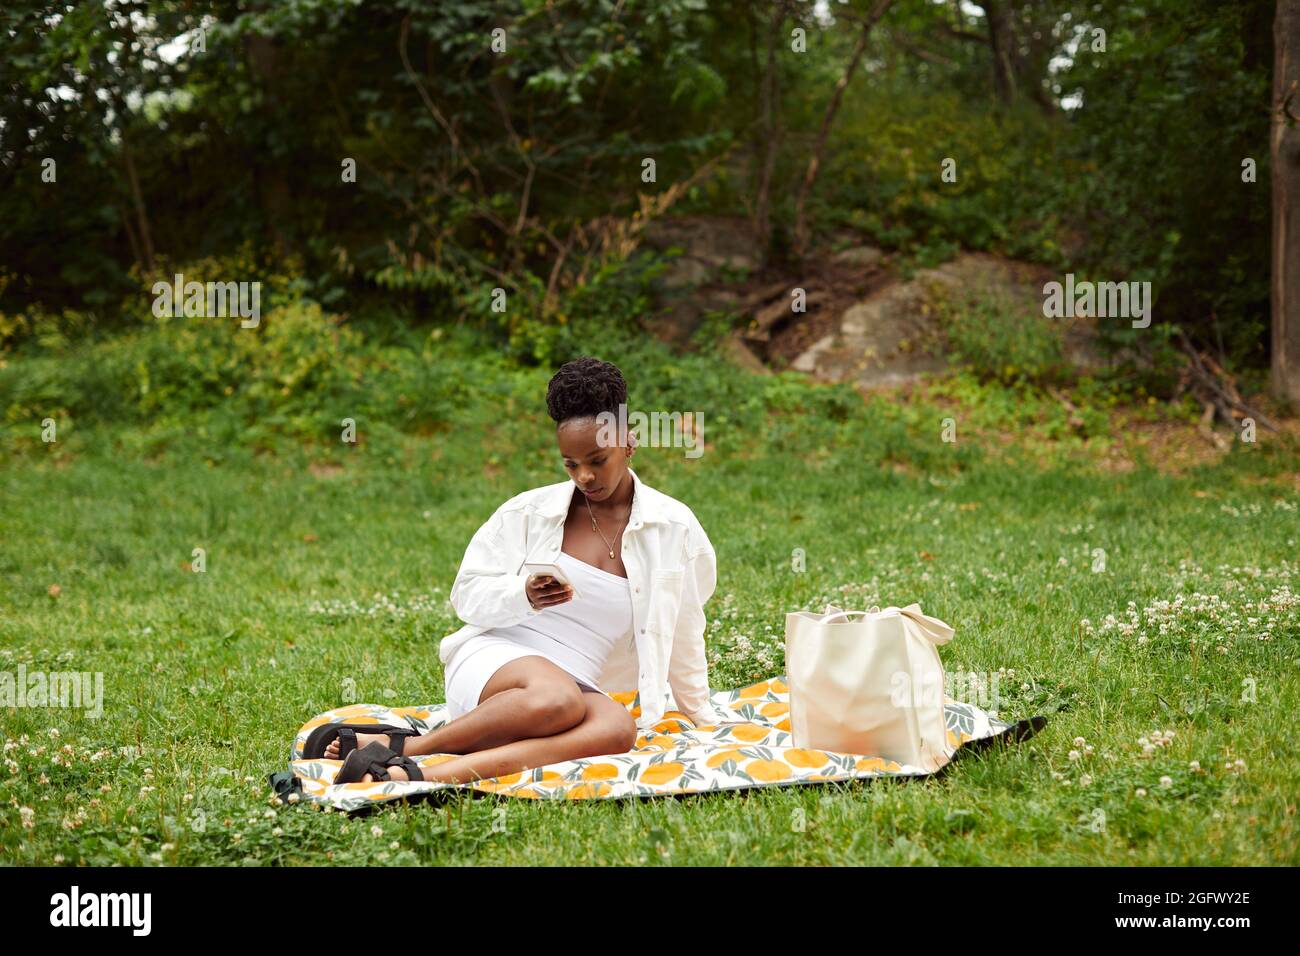 Woman sitting on blanket in park Stock Photo